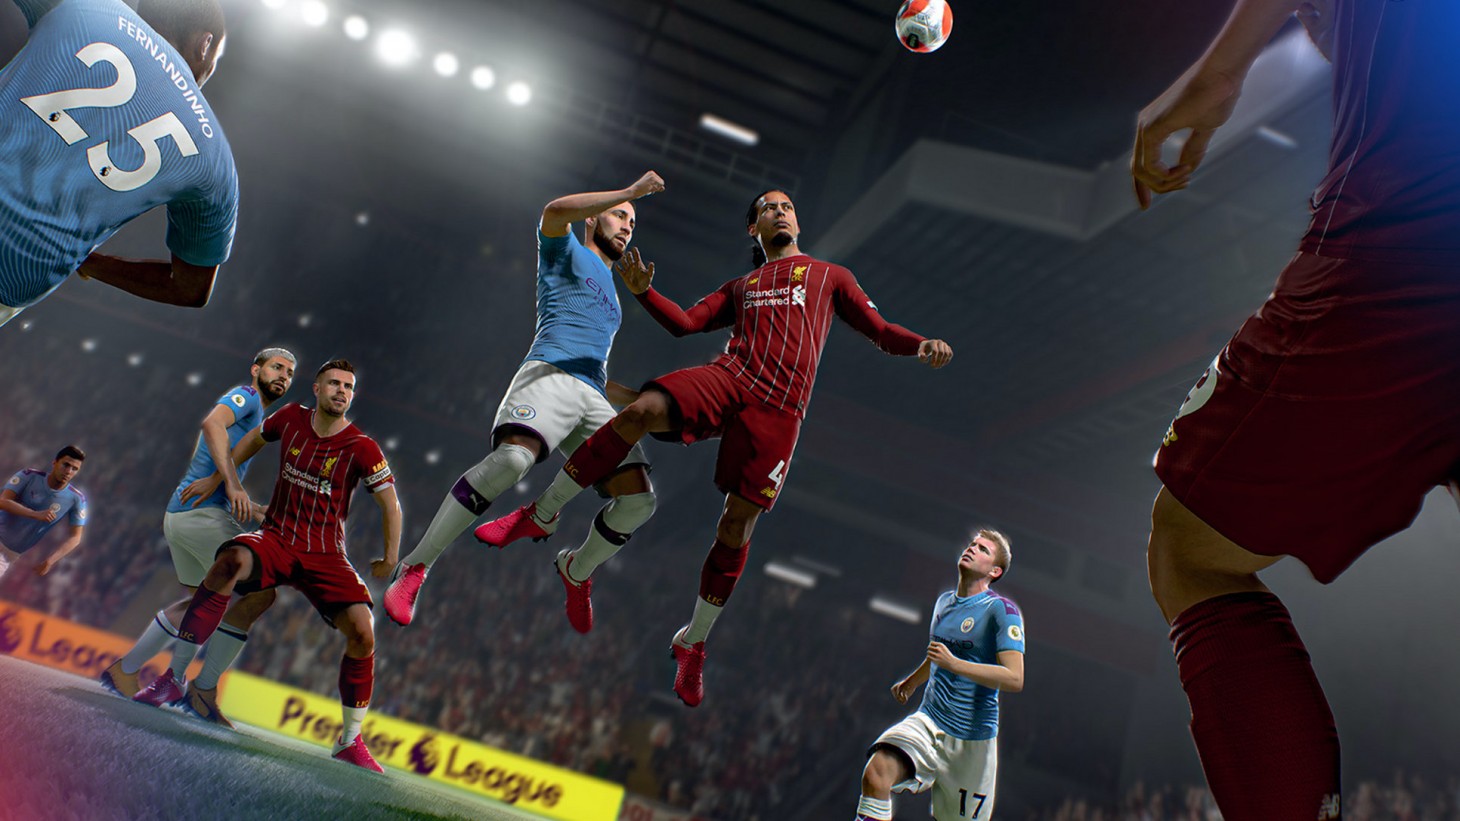 REVIEW FIFA 21 